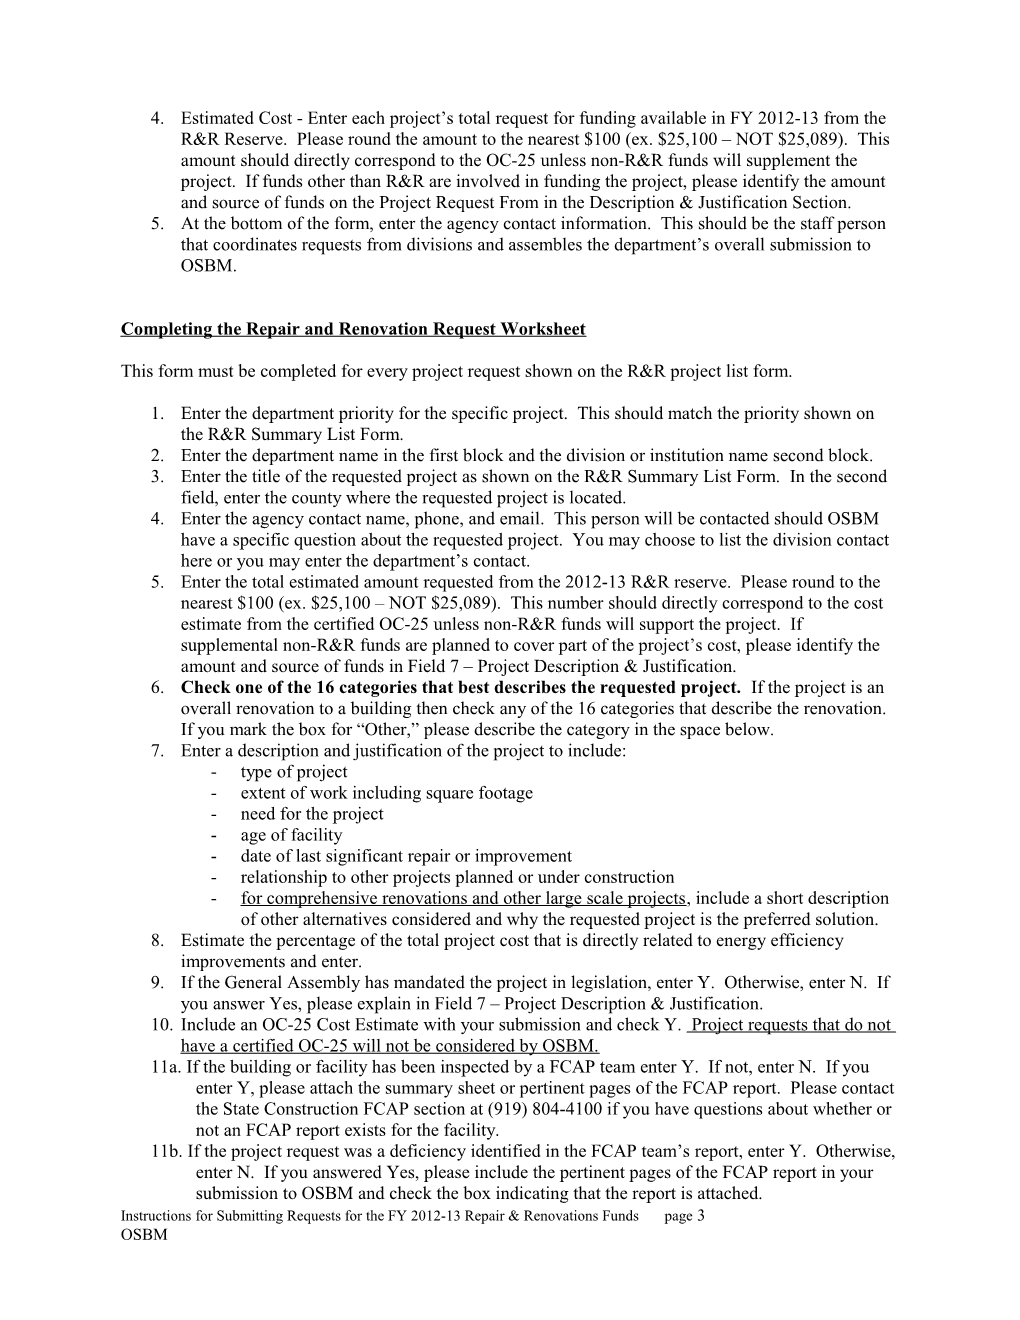 2006-07 Repair and Renovations Project Requests - General Instructions